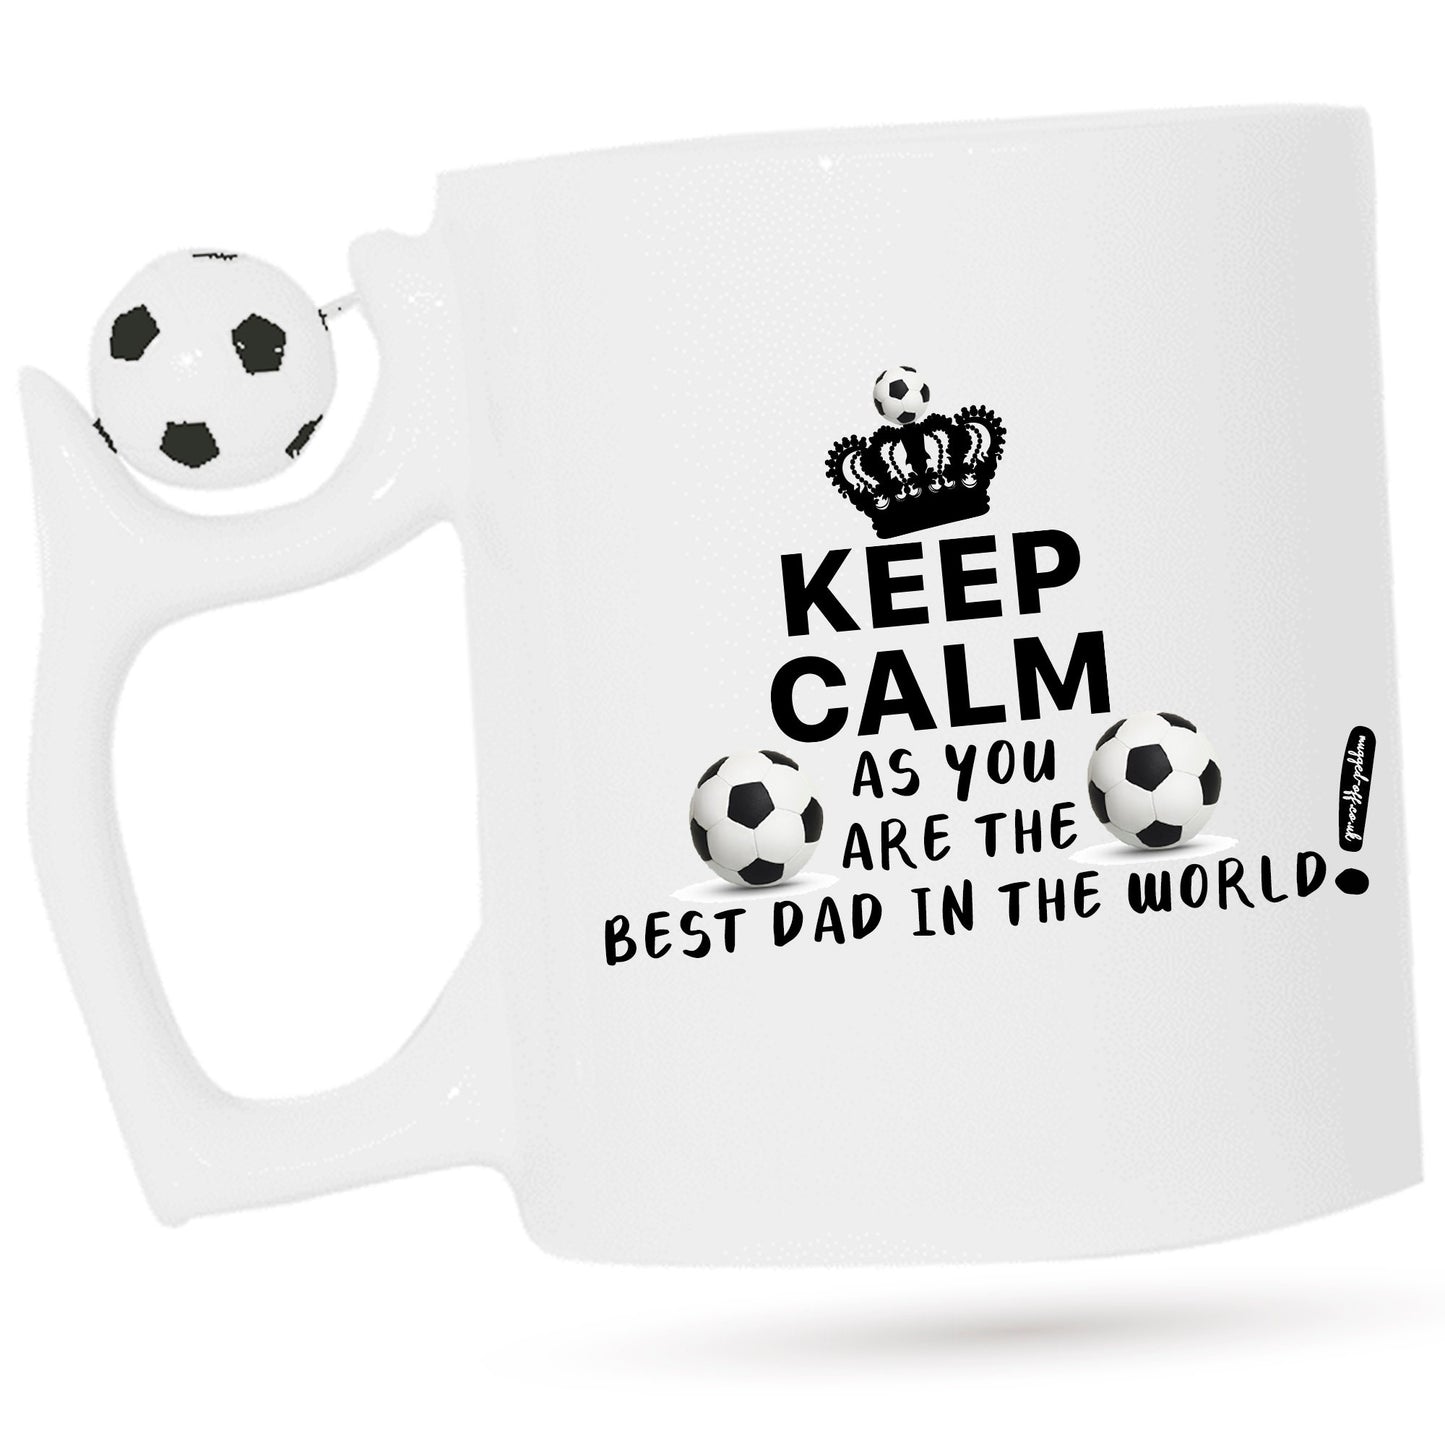 Football Fathers Day Mug - This football mug makes for a great Fathers Day Gift